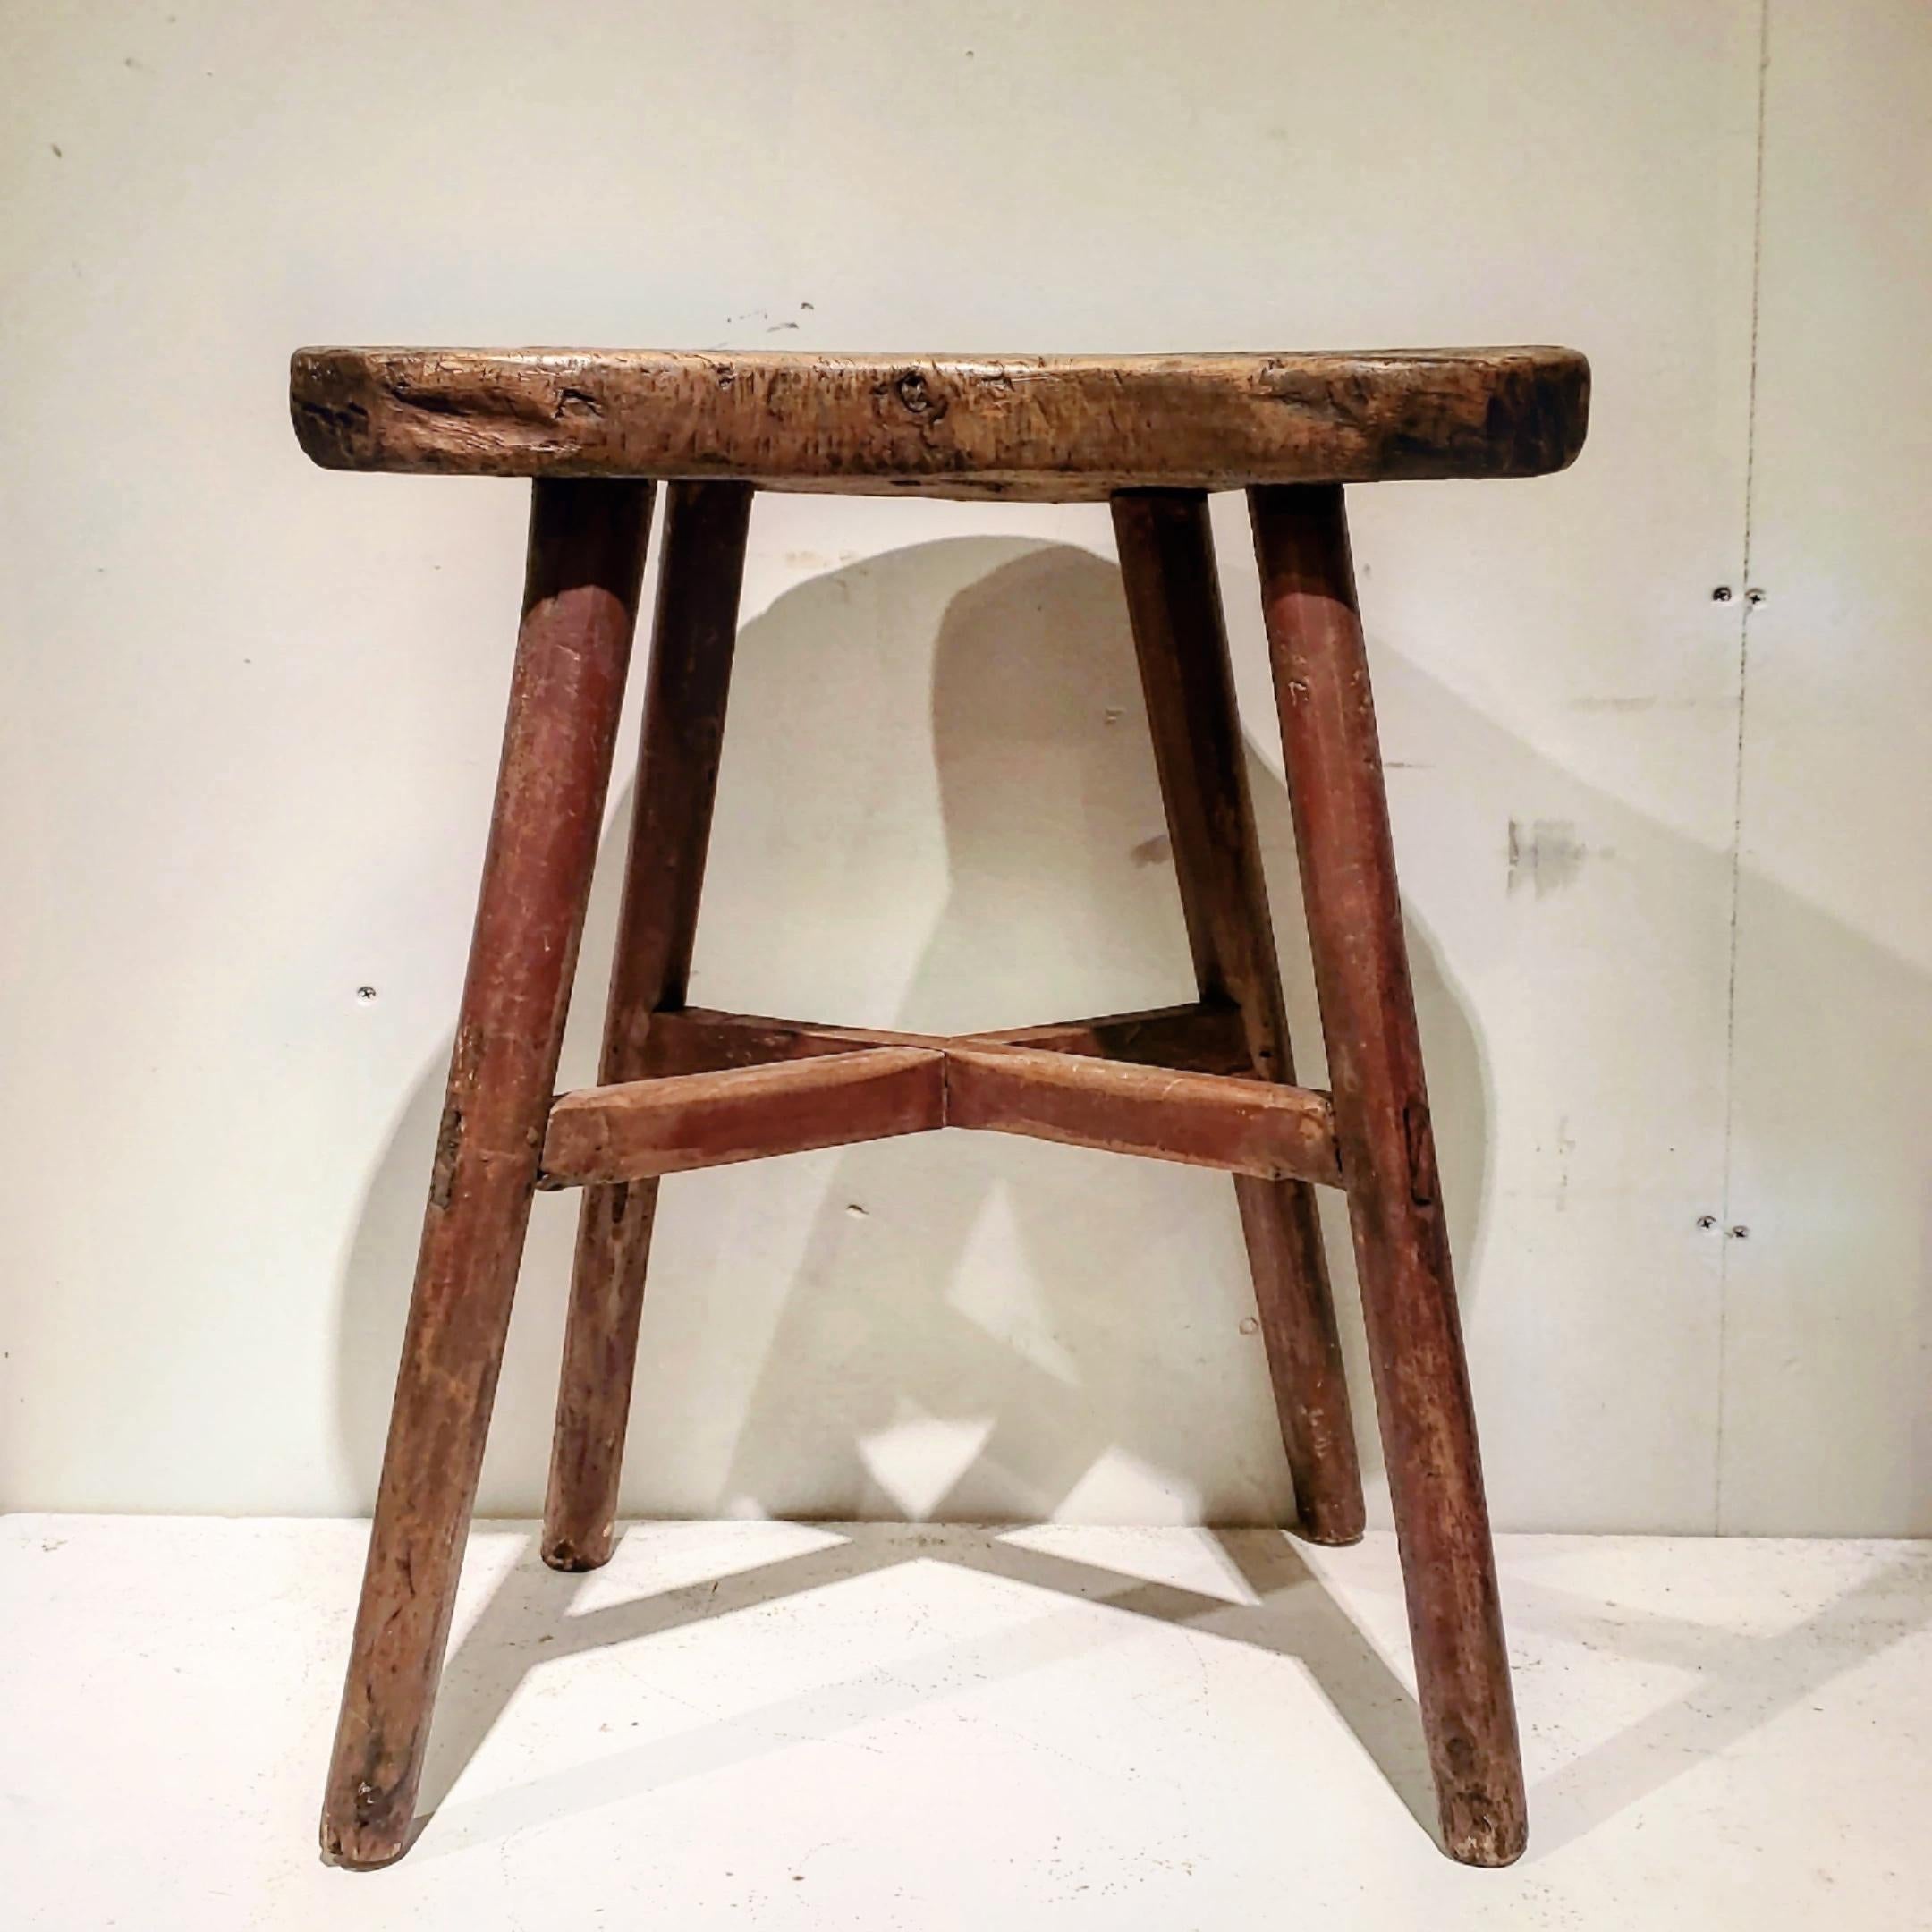 This is a wonderfully folky stool. Found in Pennsylvania. It retains an old, dry red wash on the legs. The seat is made from a sold plank. The entire item is pegged pegged construction.
Great height for a side table.

 